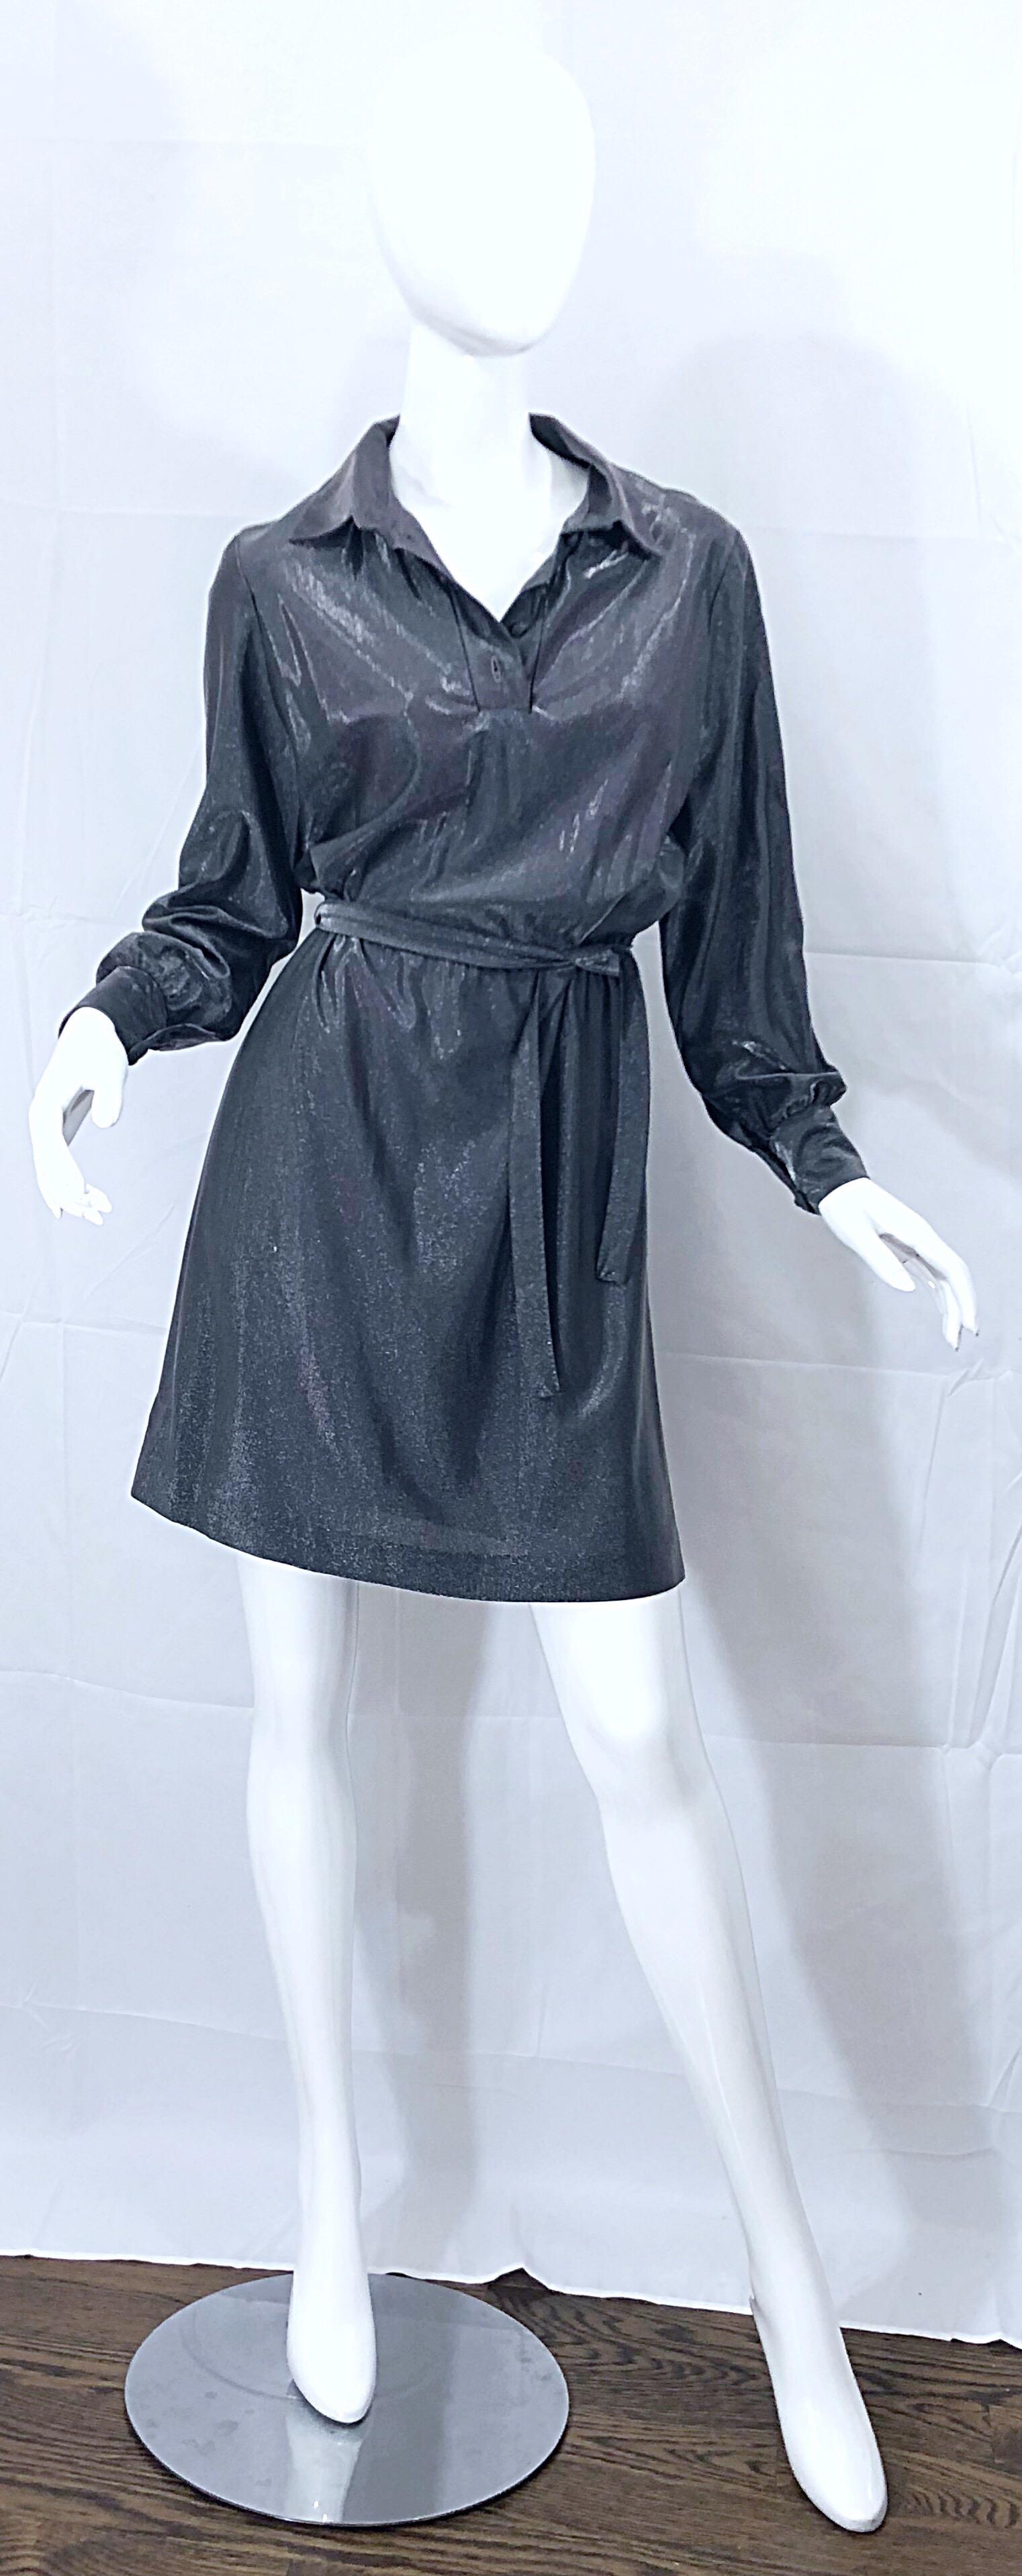  Wonderful 1970s gunmetal metallic long sleeve belted shirt dress! Features a loose fitting bodice that is both comfortable and flattering. Buttons up at neck and at each sleeve cuff. Built in interior elastic waistband stretches to fit an array of